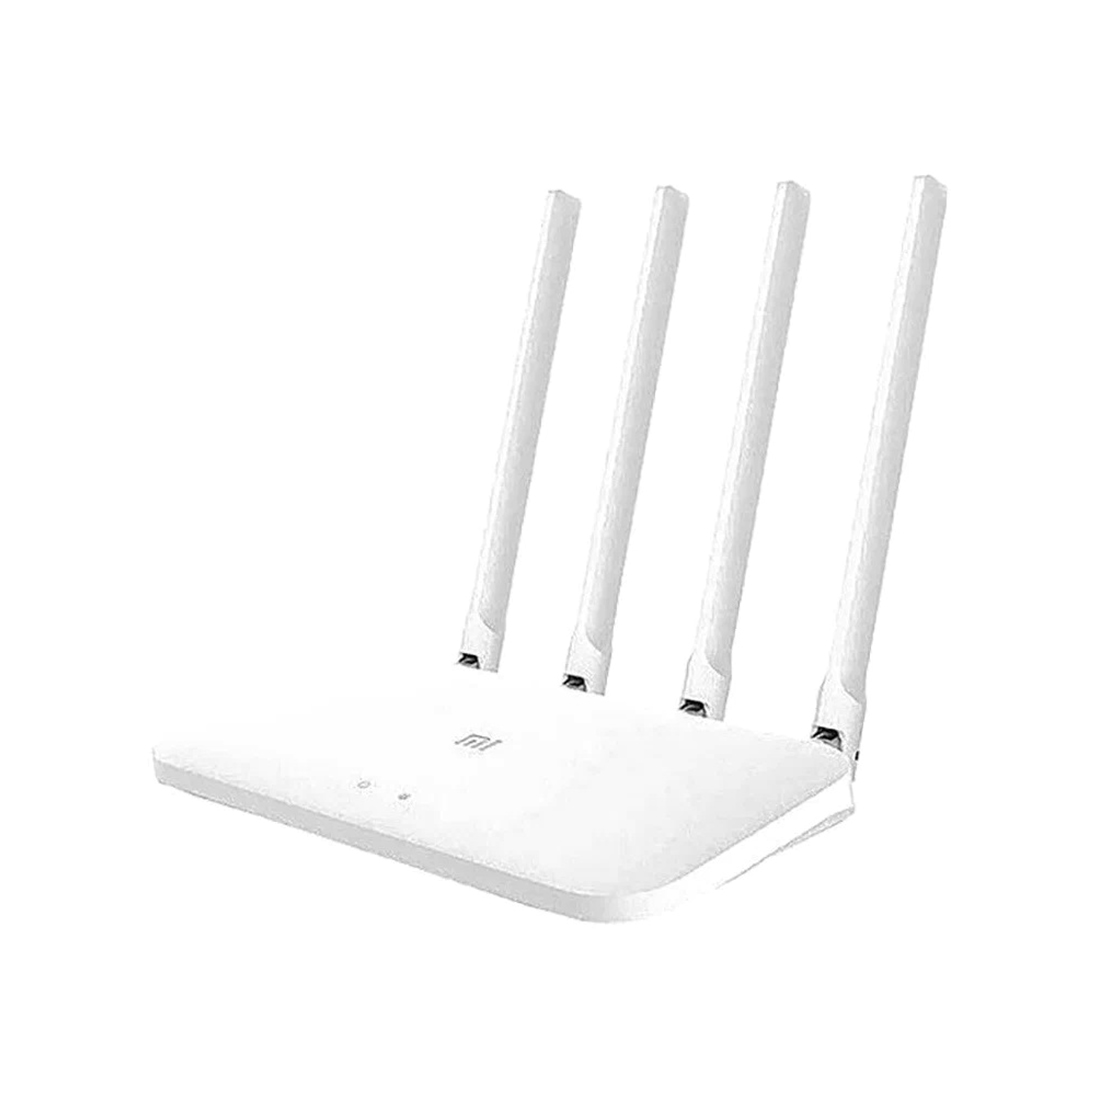 Маршрутизатор, Xiaomi, Router AC1200 (RB02), WI-FI5, 802.11 a/b/g/n/ac, 4 внешних антенны 22 MIMO 2.